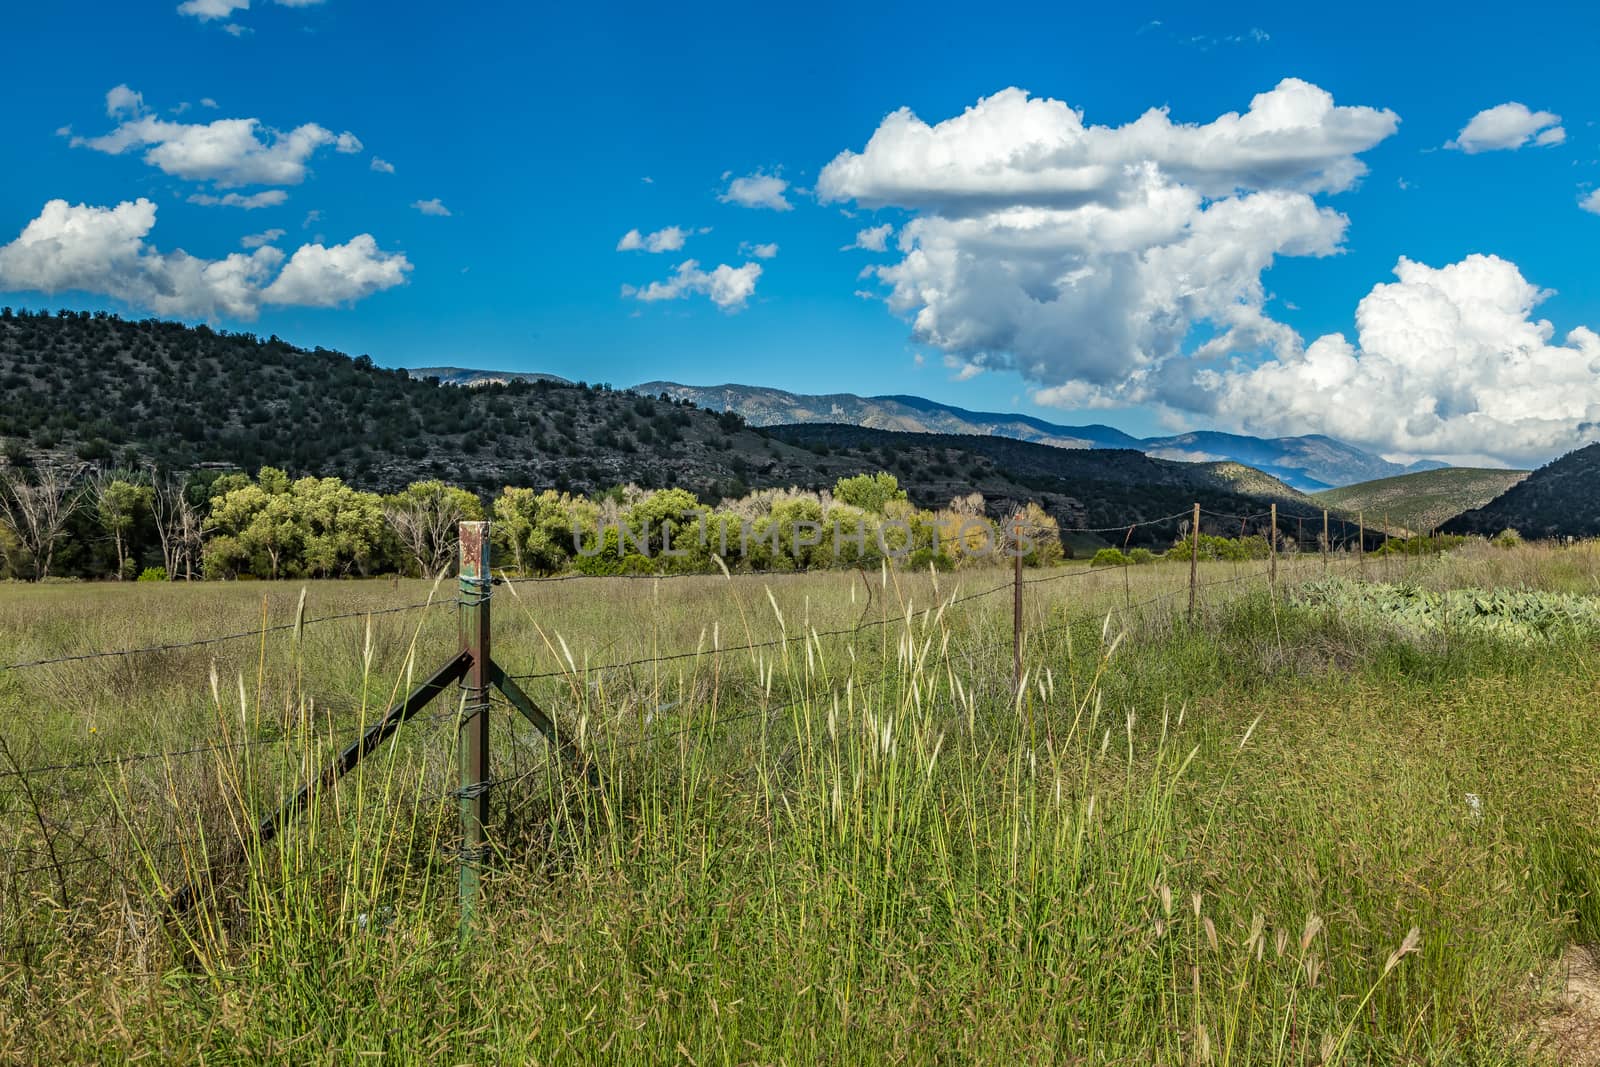 A view of the Capitan Mountains in south central New Mexico from along the Billy the Kid Trail in Lincoln County.